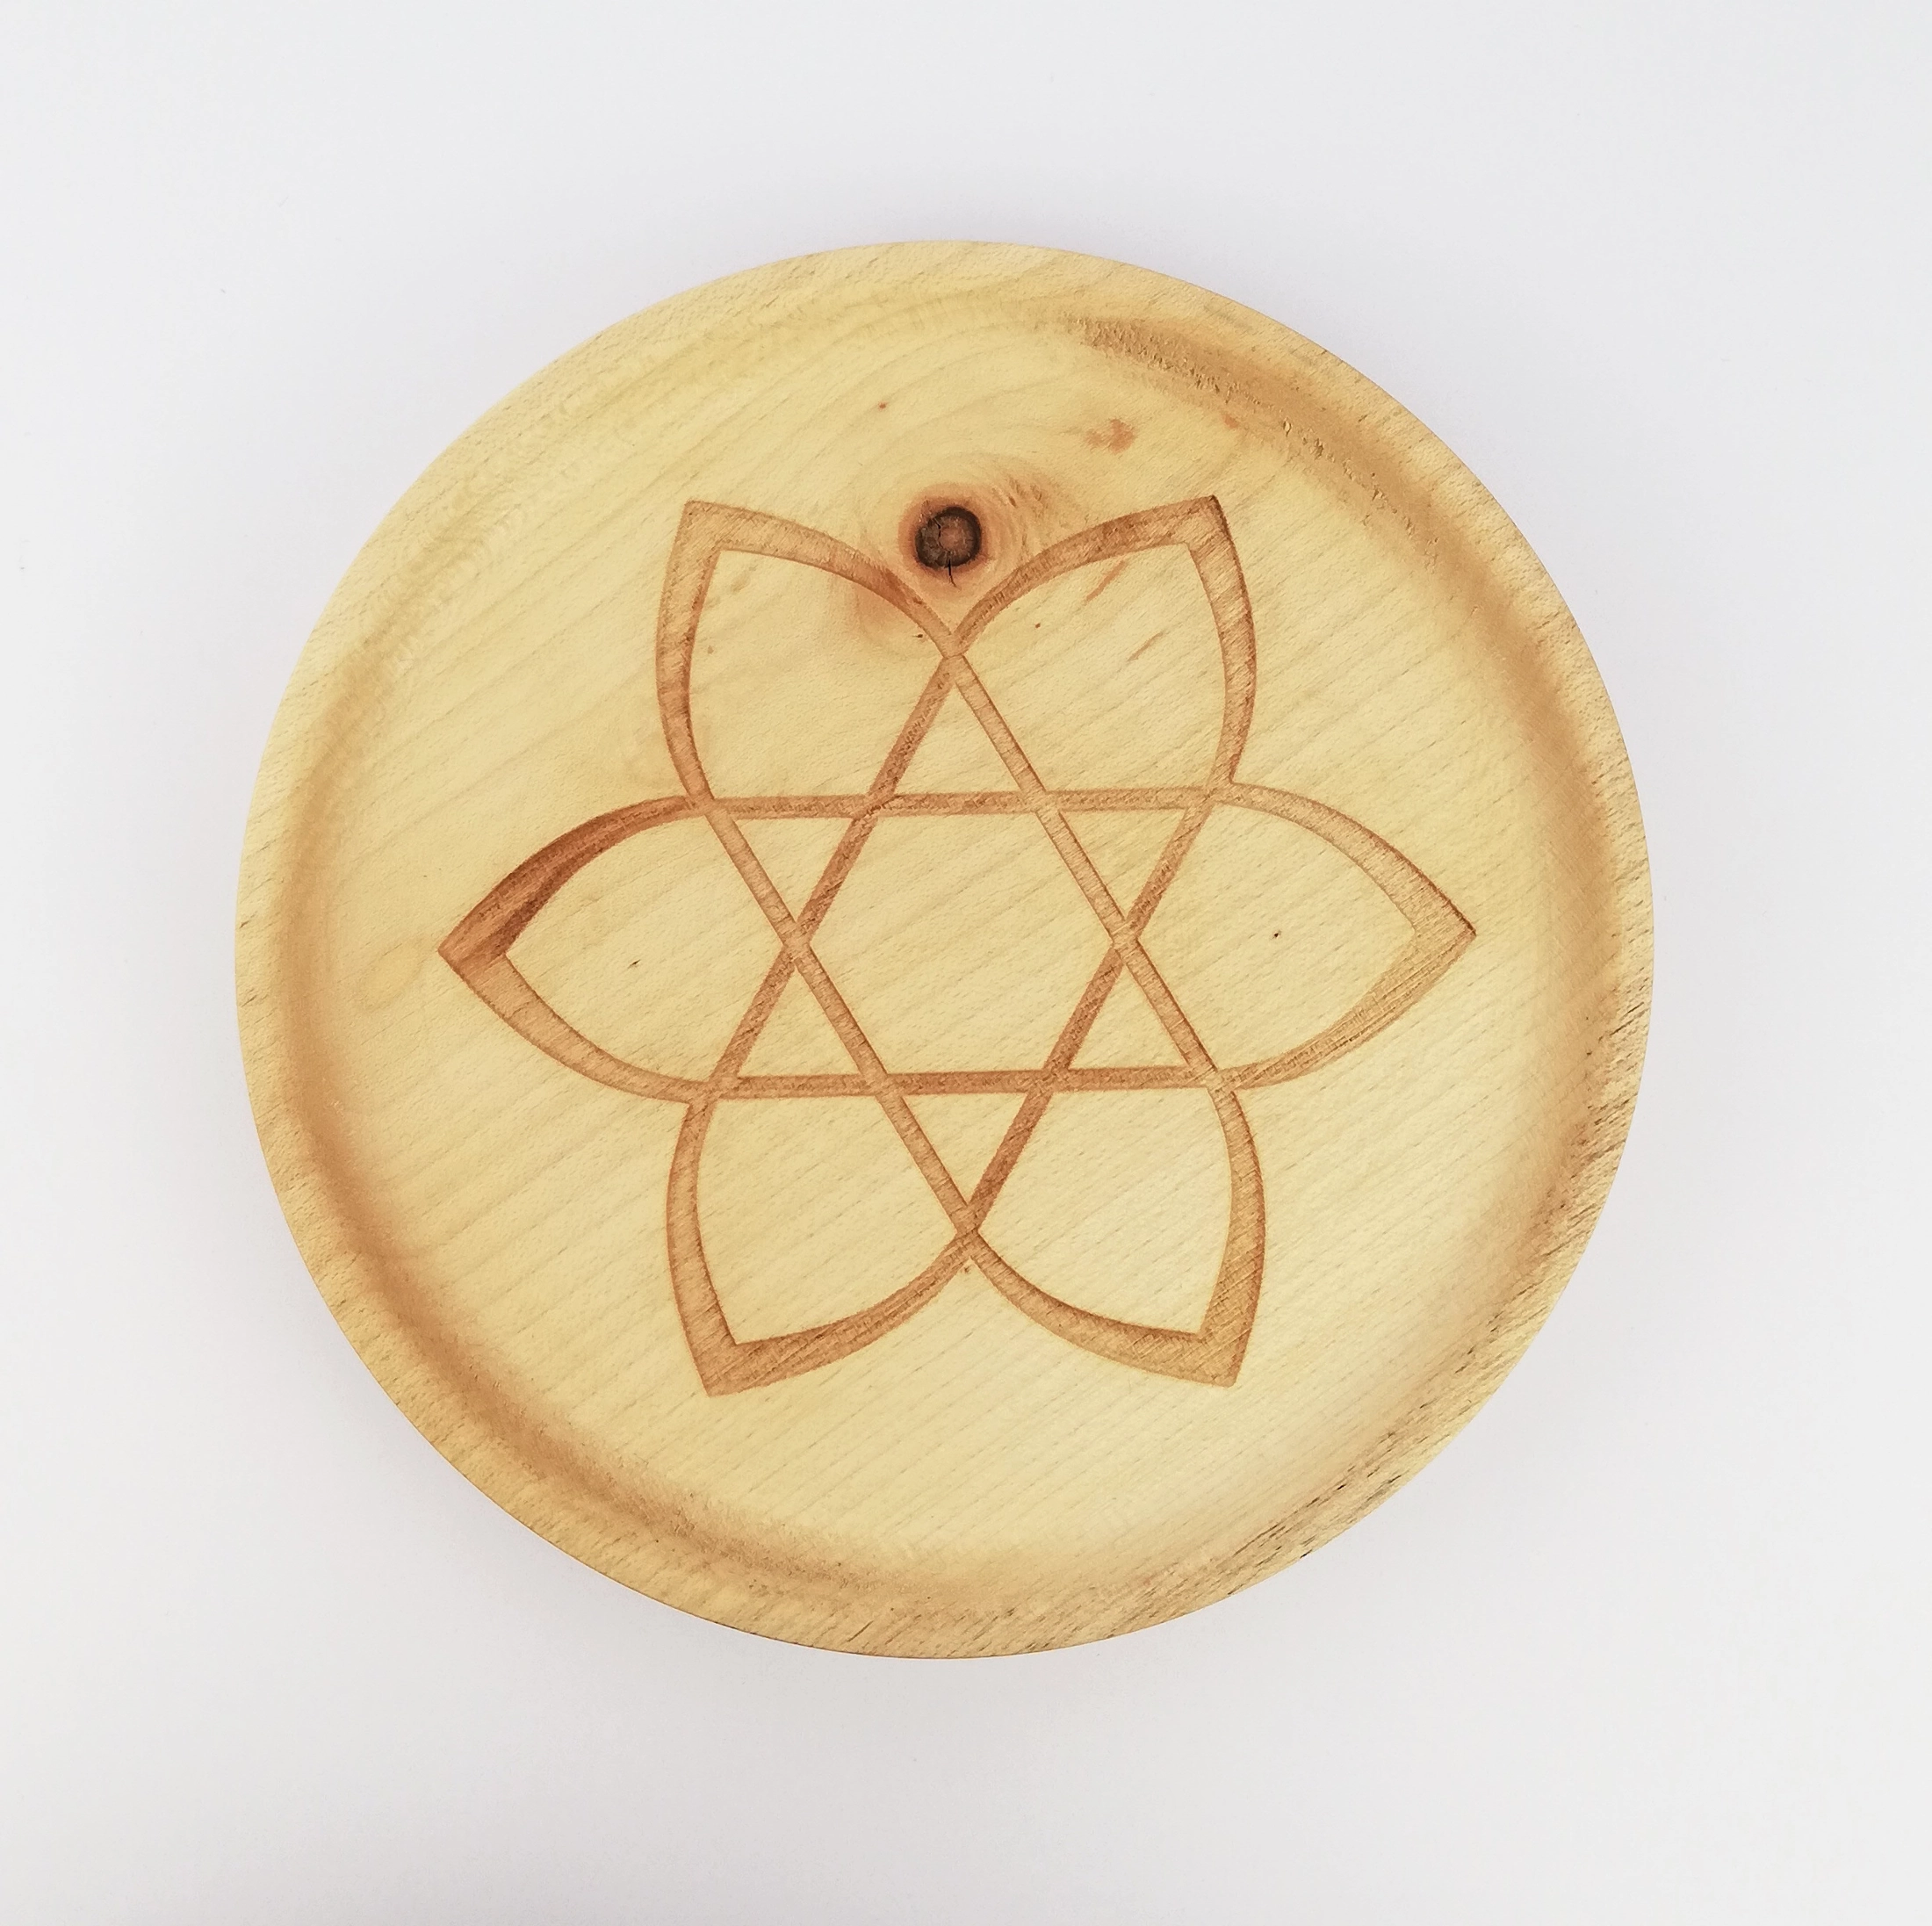 Hexagram (version 1) on a small plate (16cm/6.3in in diameter), front.